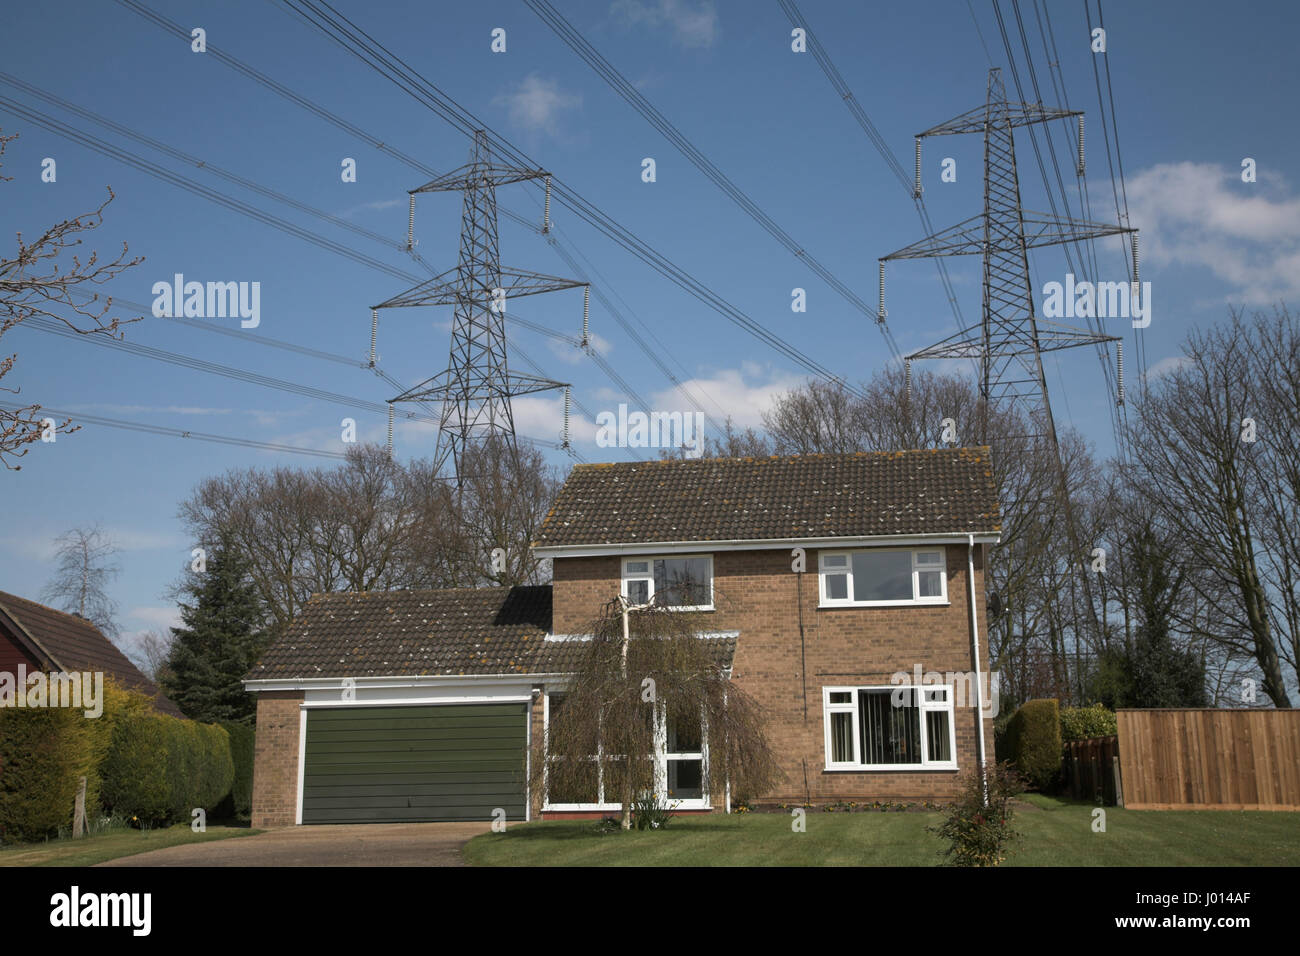 high-voltage-electricity-power-lines-from-sizewell-over-suburban-houses-J014AF.jpg